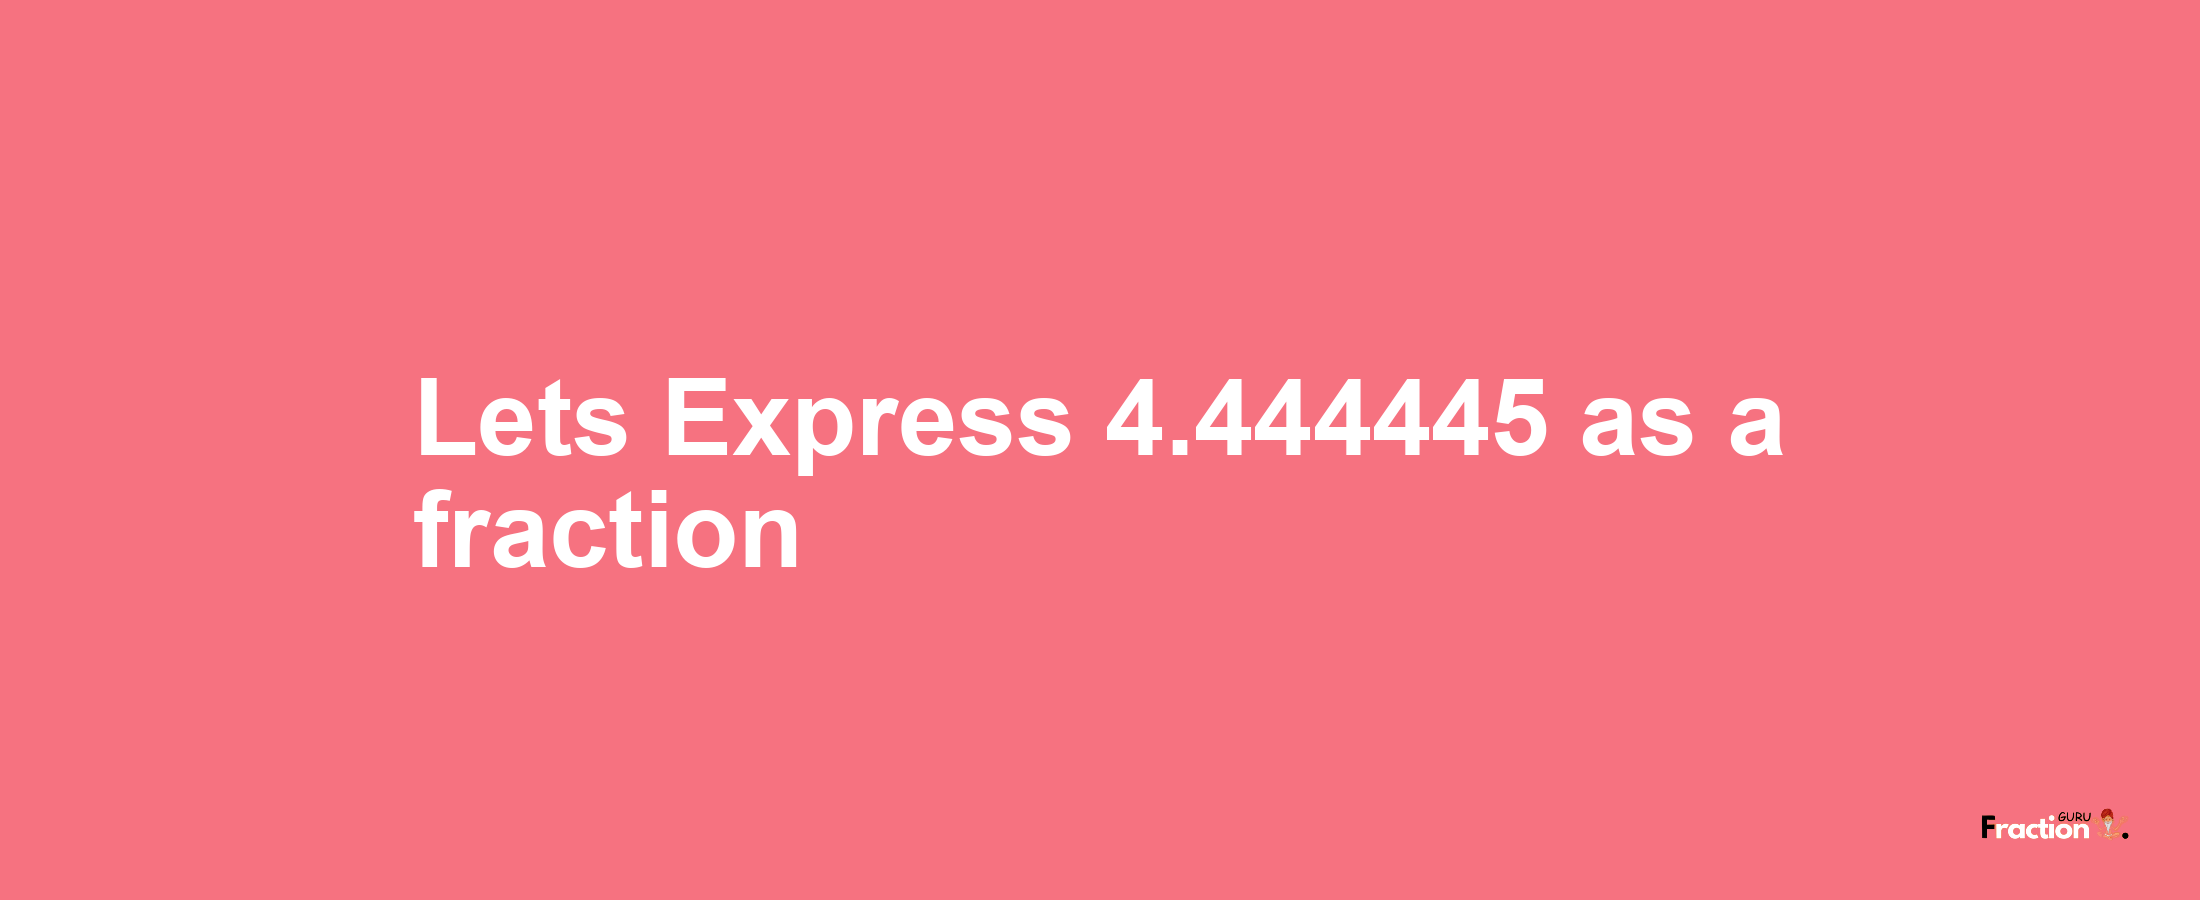 Lets Express 4.444445 as afraction